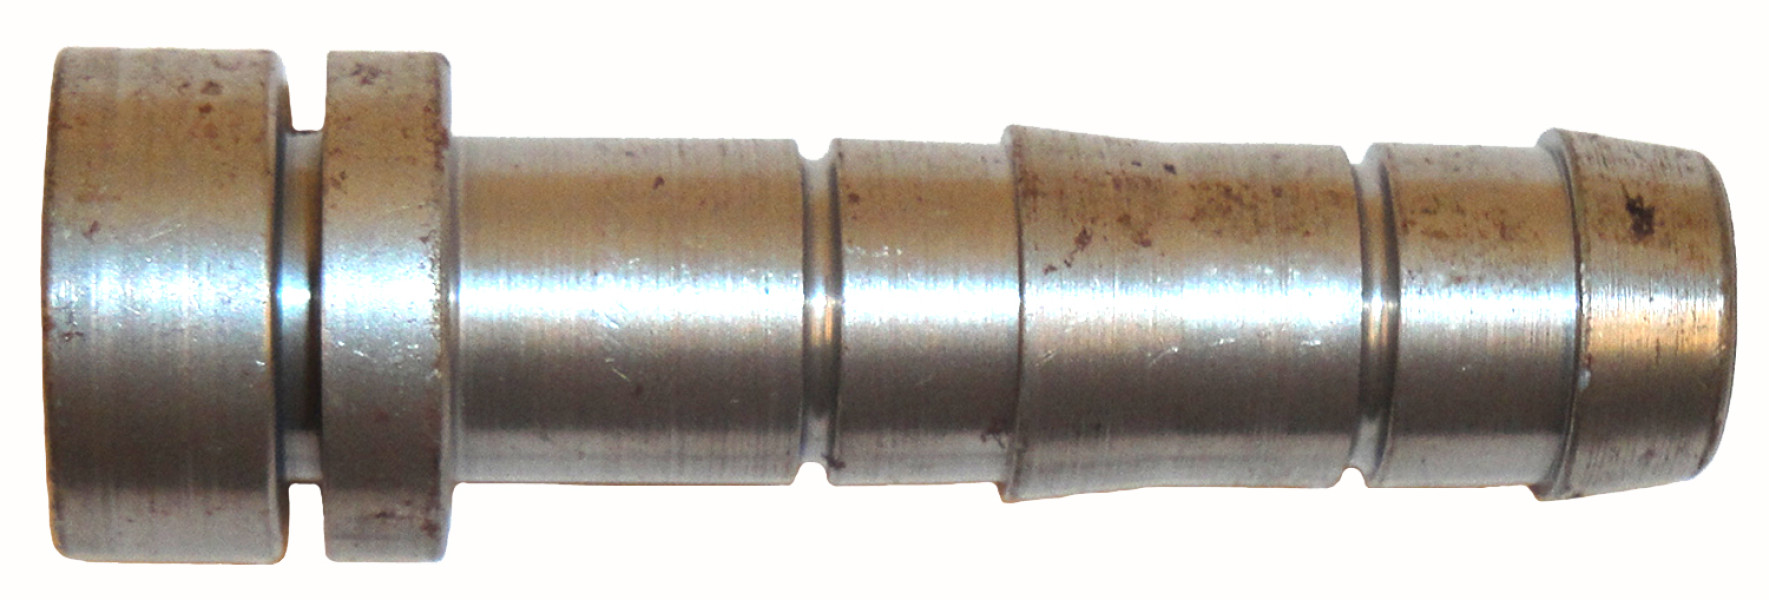 Image of A/C Refrigerant Hose Fitting from Sunair. Part number: FF12262-0608